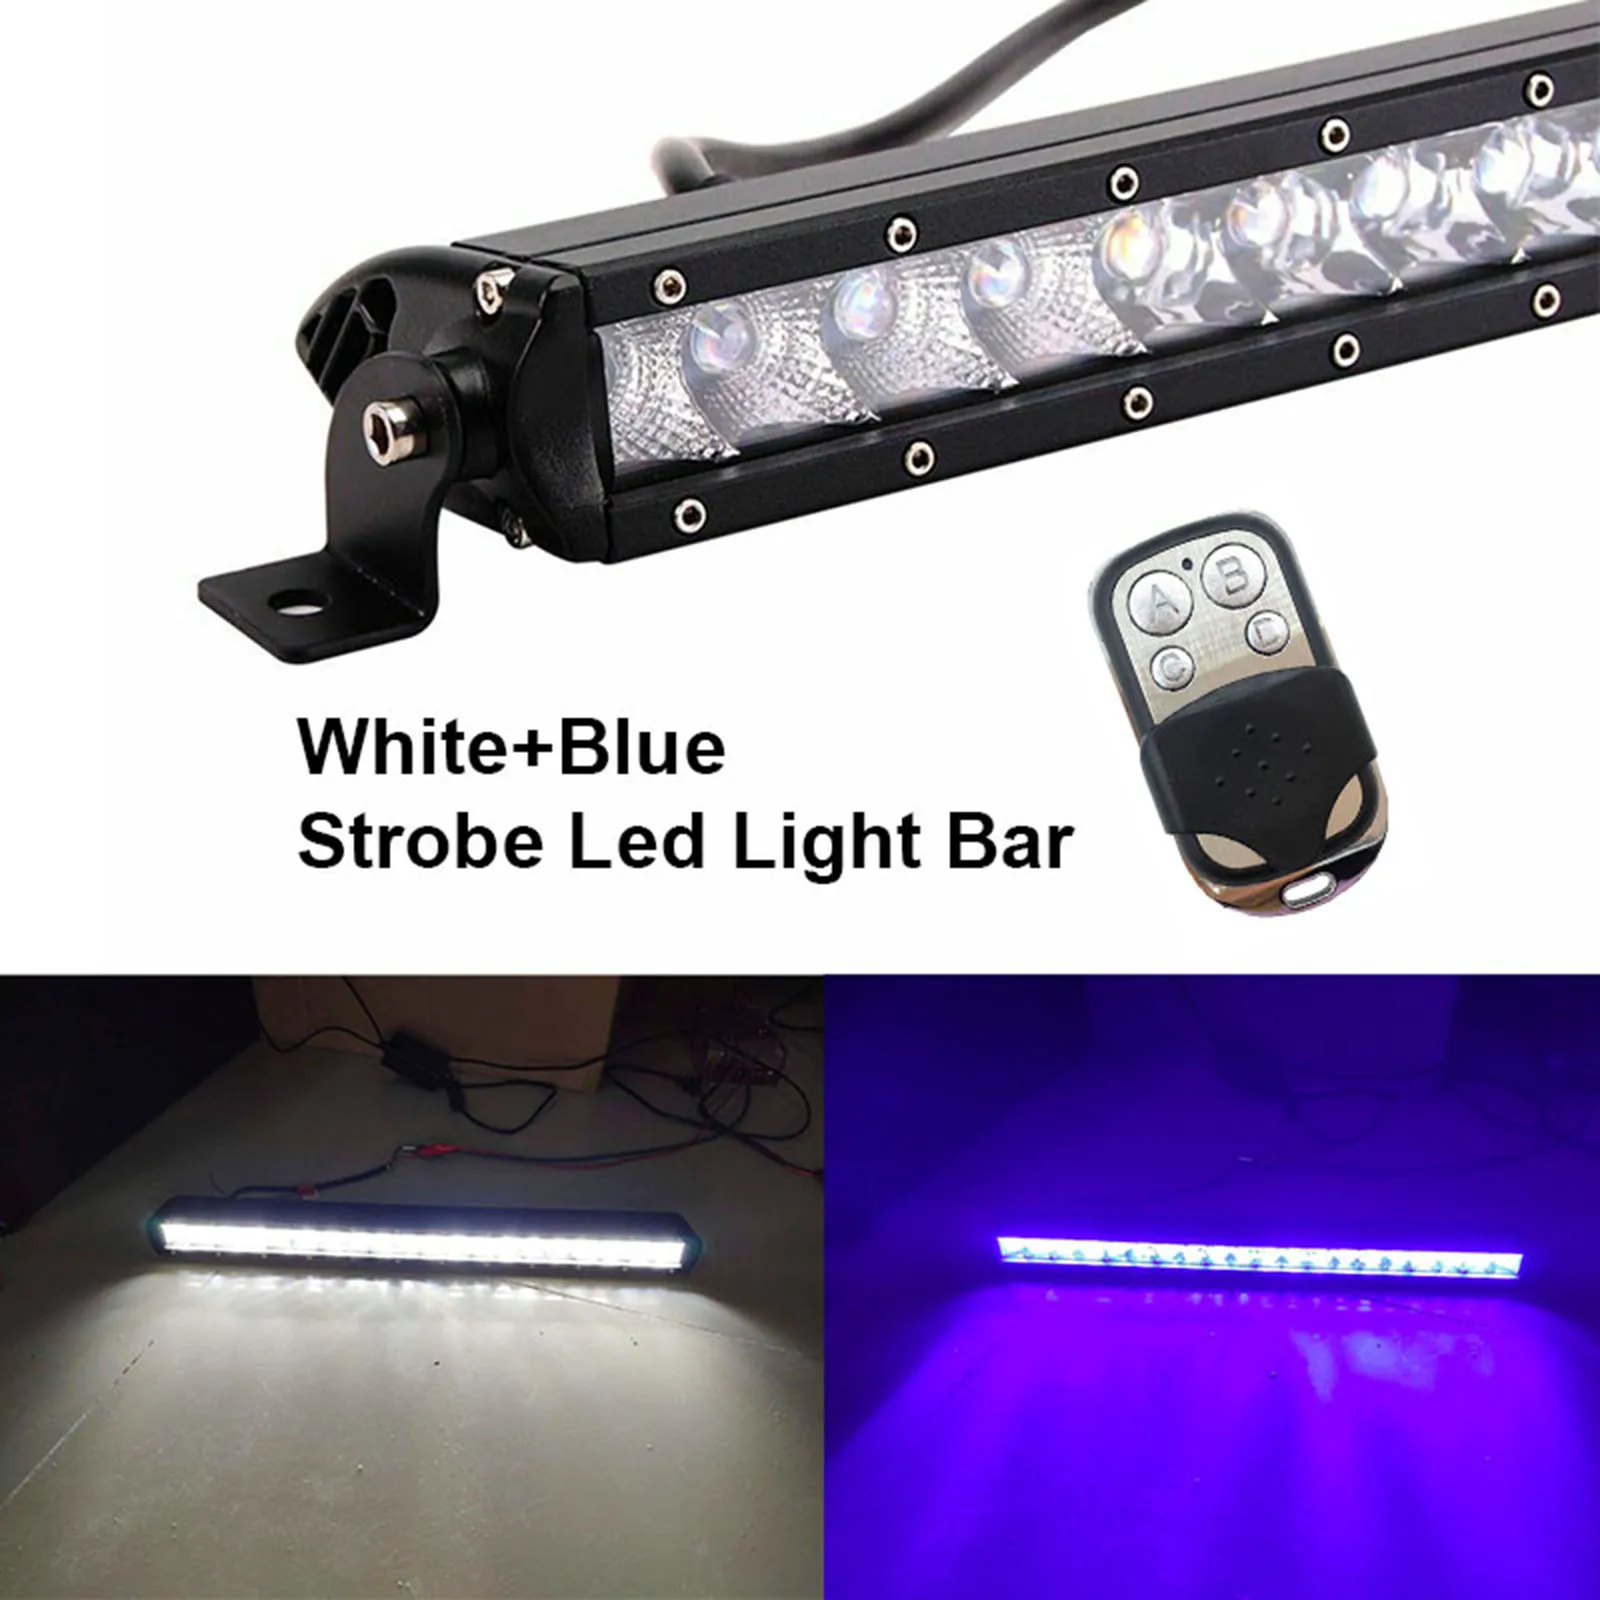 

22 32 42 52inch LED Light Bar Single Row Work Driving White Blue Color Changing Strobeflash Warning Lamp for SUV Truck Vehicles